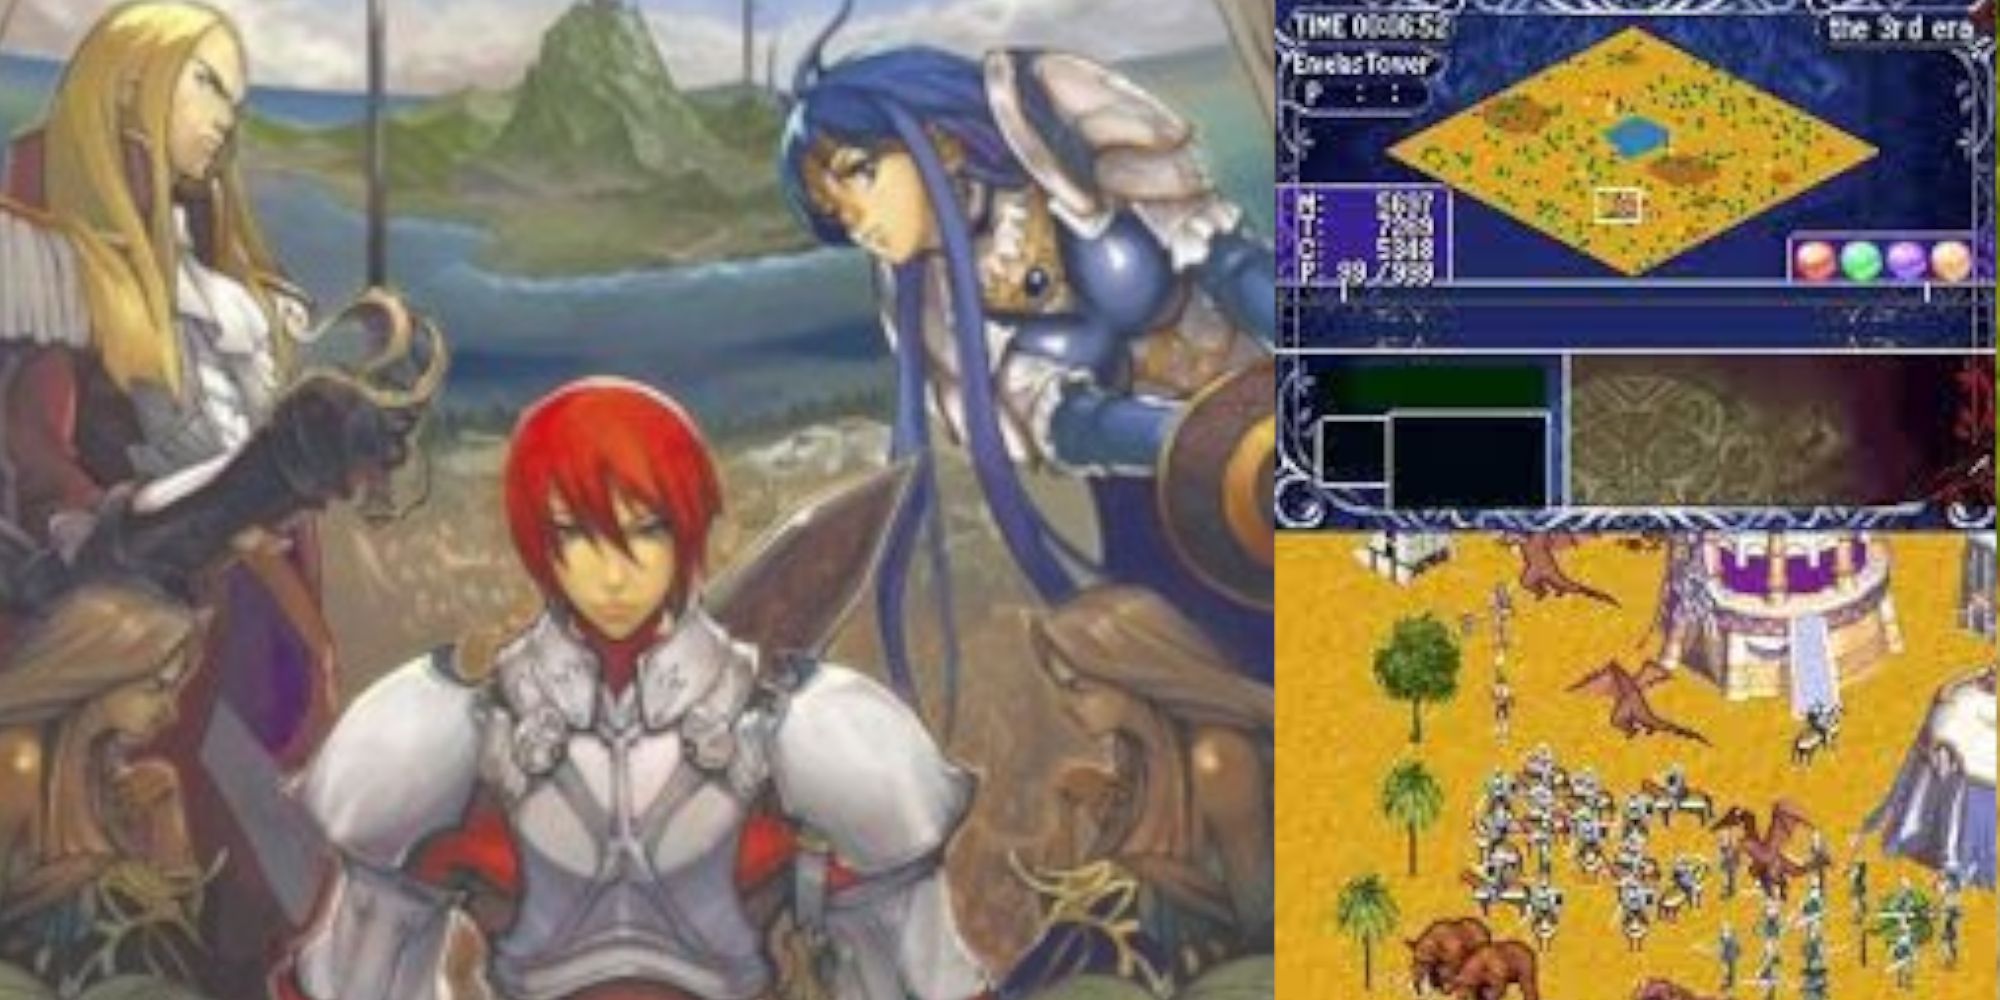 Ys Strategy cover art and gameplay